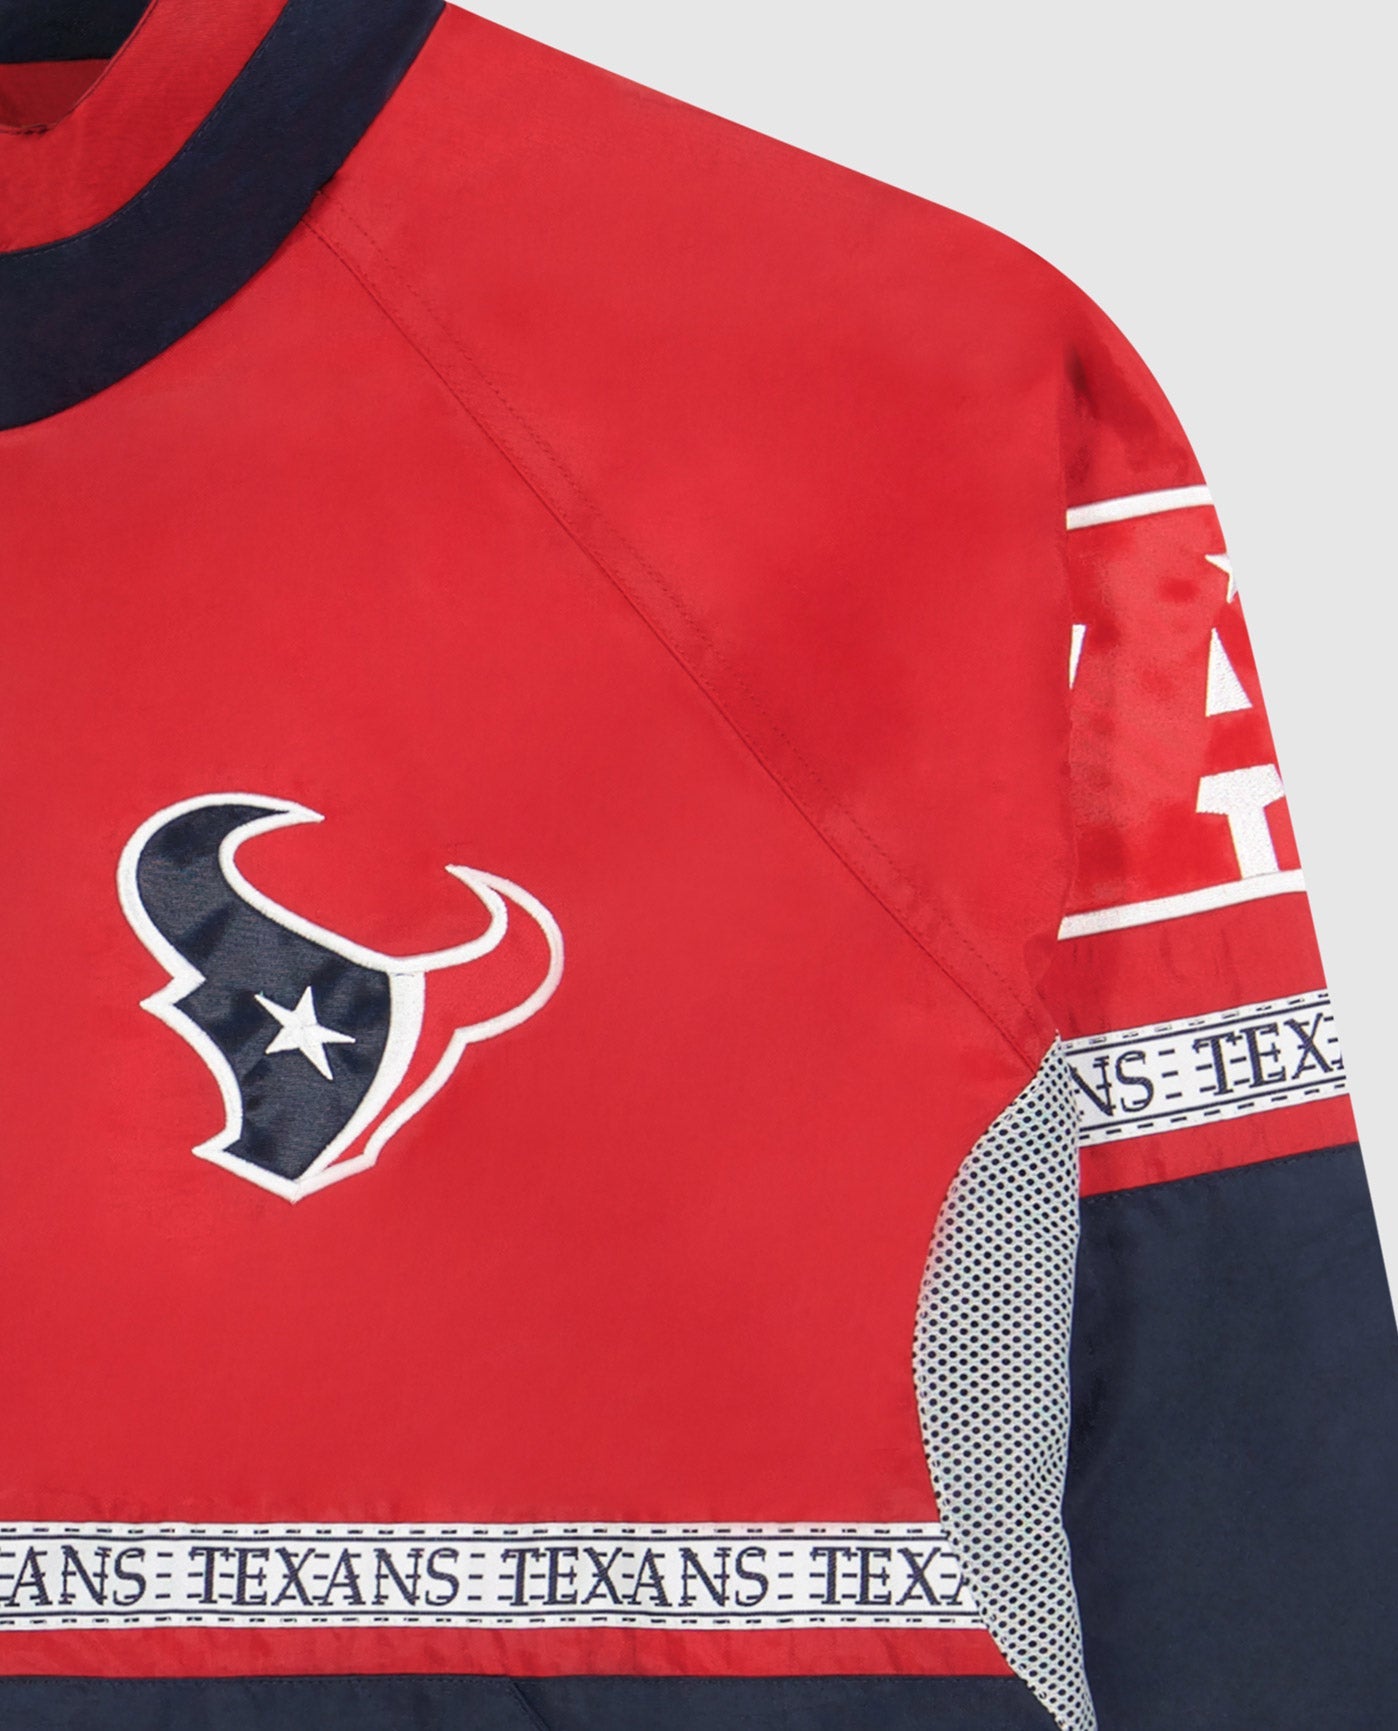 Houston Texans logo top left chest, Twill Applique Conference logo and "TEXANS" tape on mid body and sleeves | Texans Red Navy